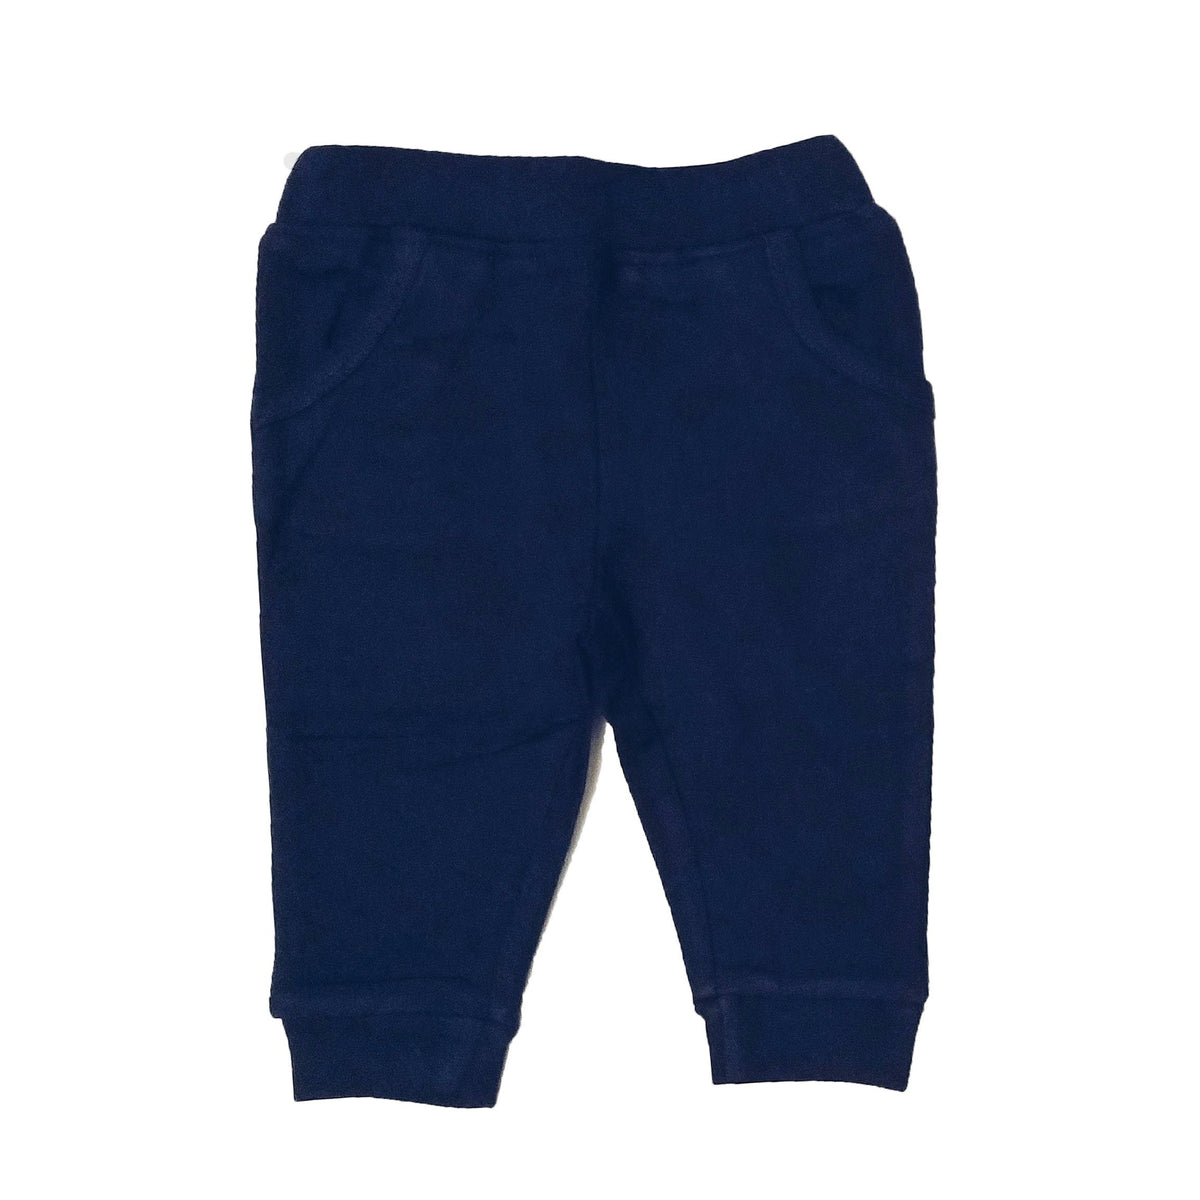 Organic navy blue sweatpants by Lucy Lue Organics. Made in the softest organic cotton. Your favorite organic baby brand. Winter baby clothes